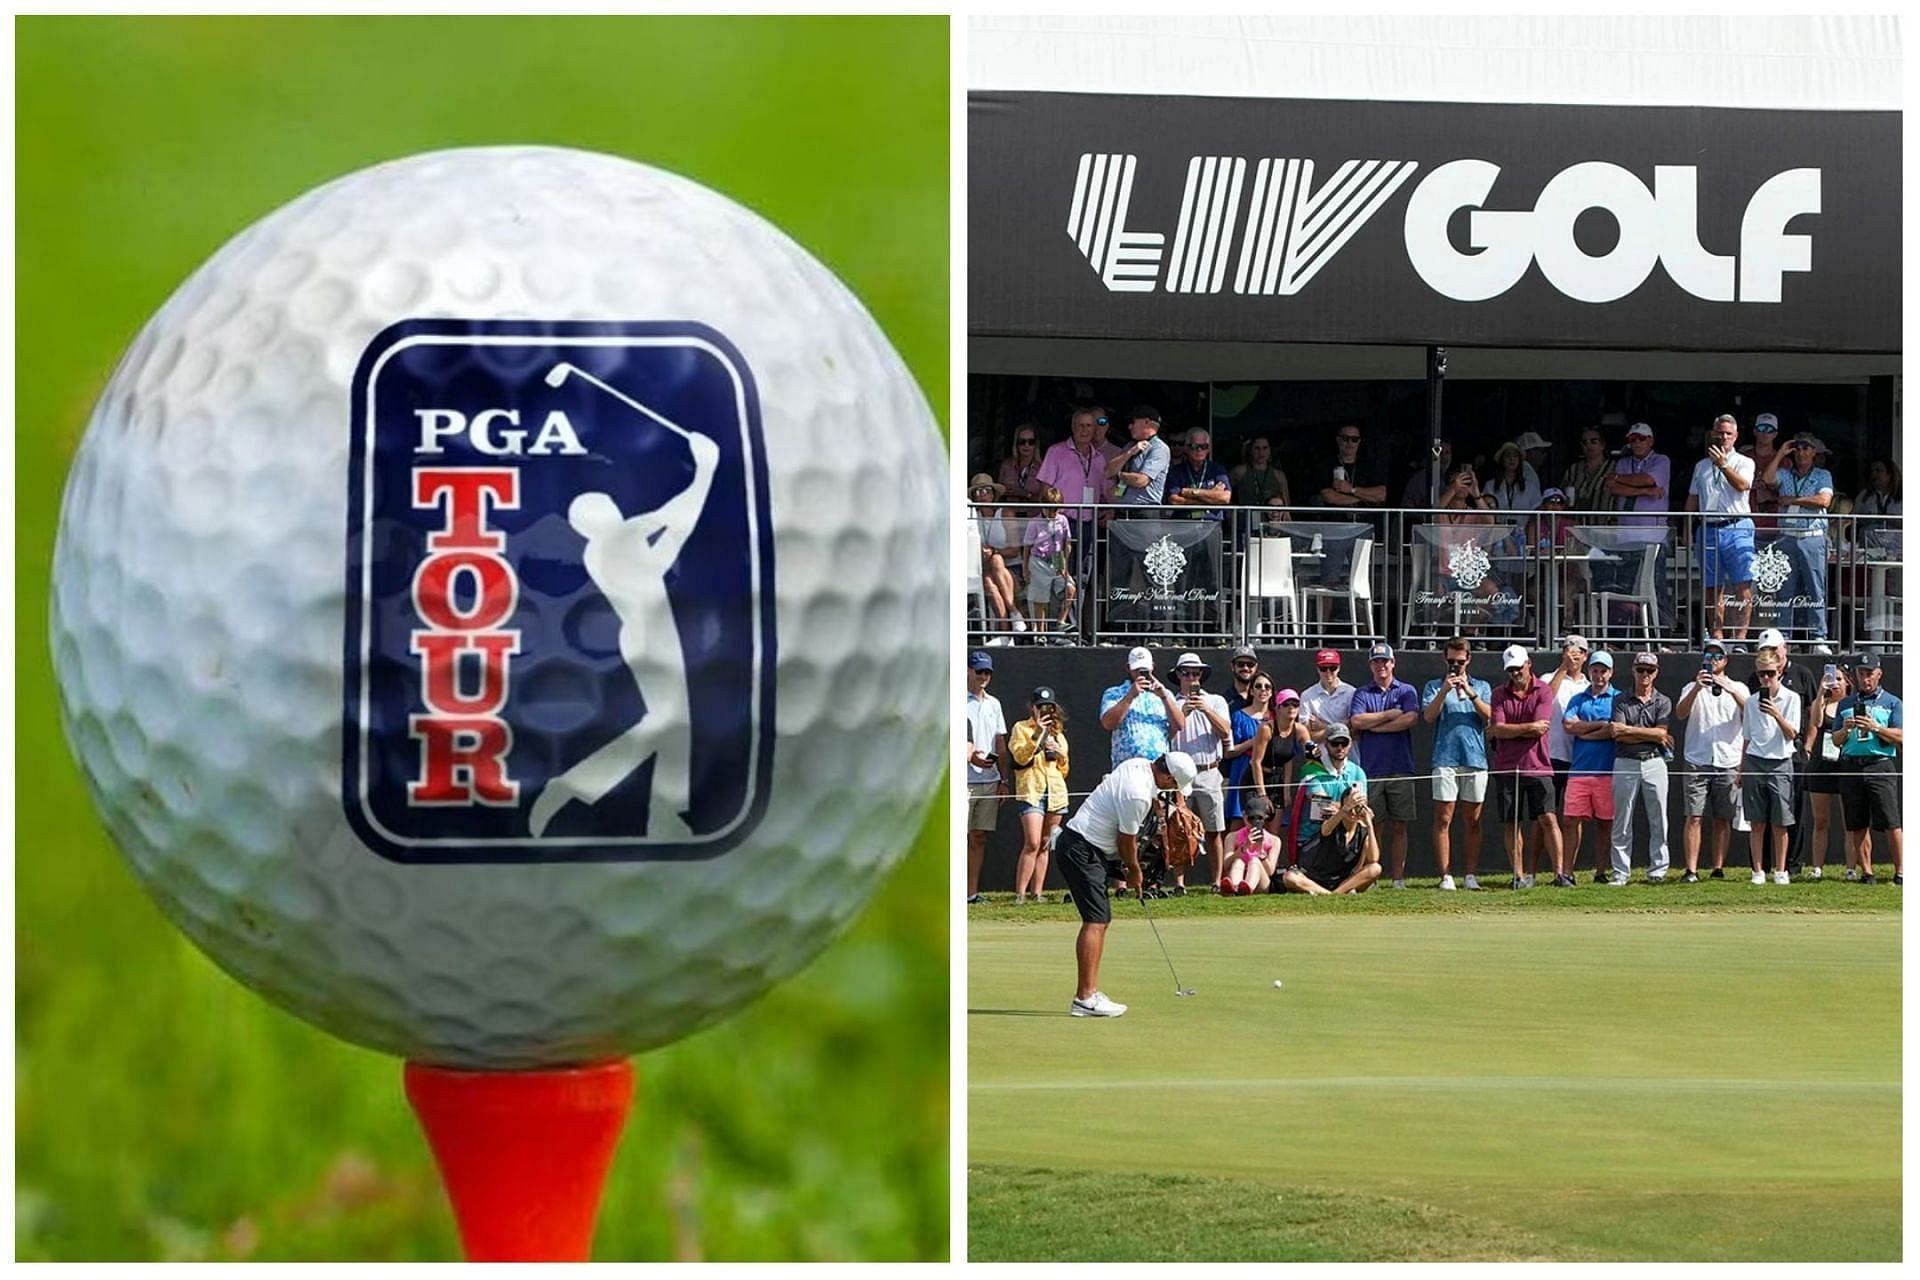 PGA Tour x LIV Golf deal to be delayed as players demand more power